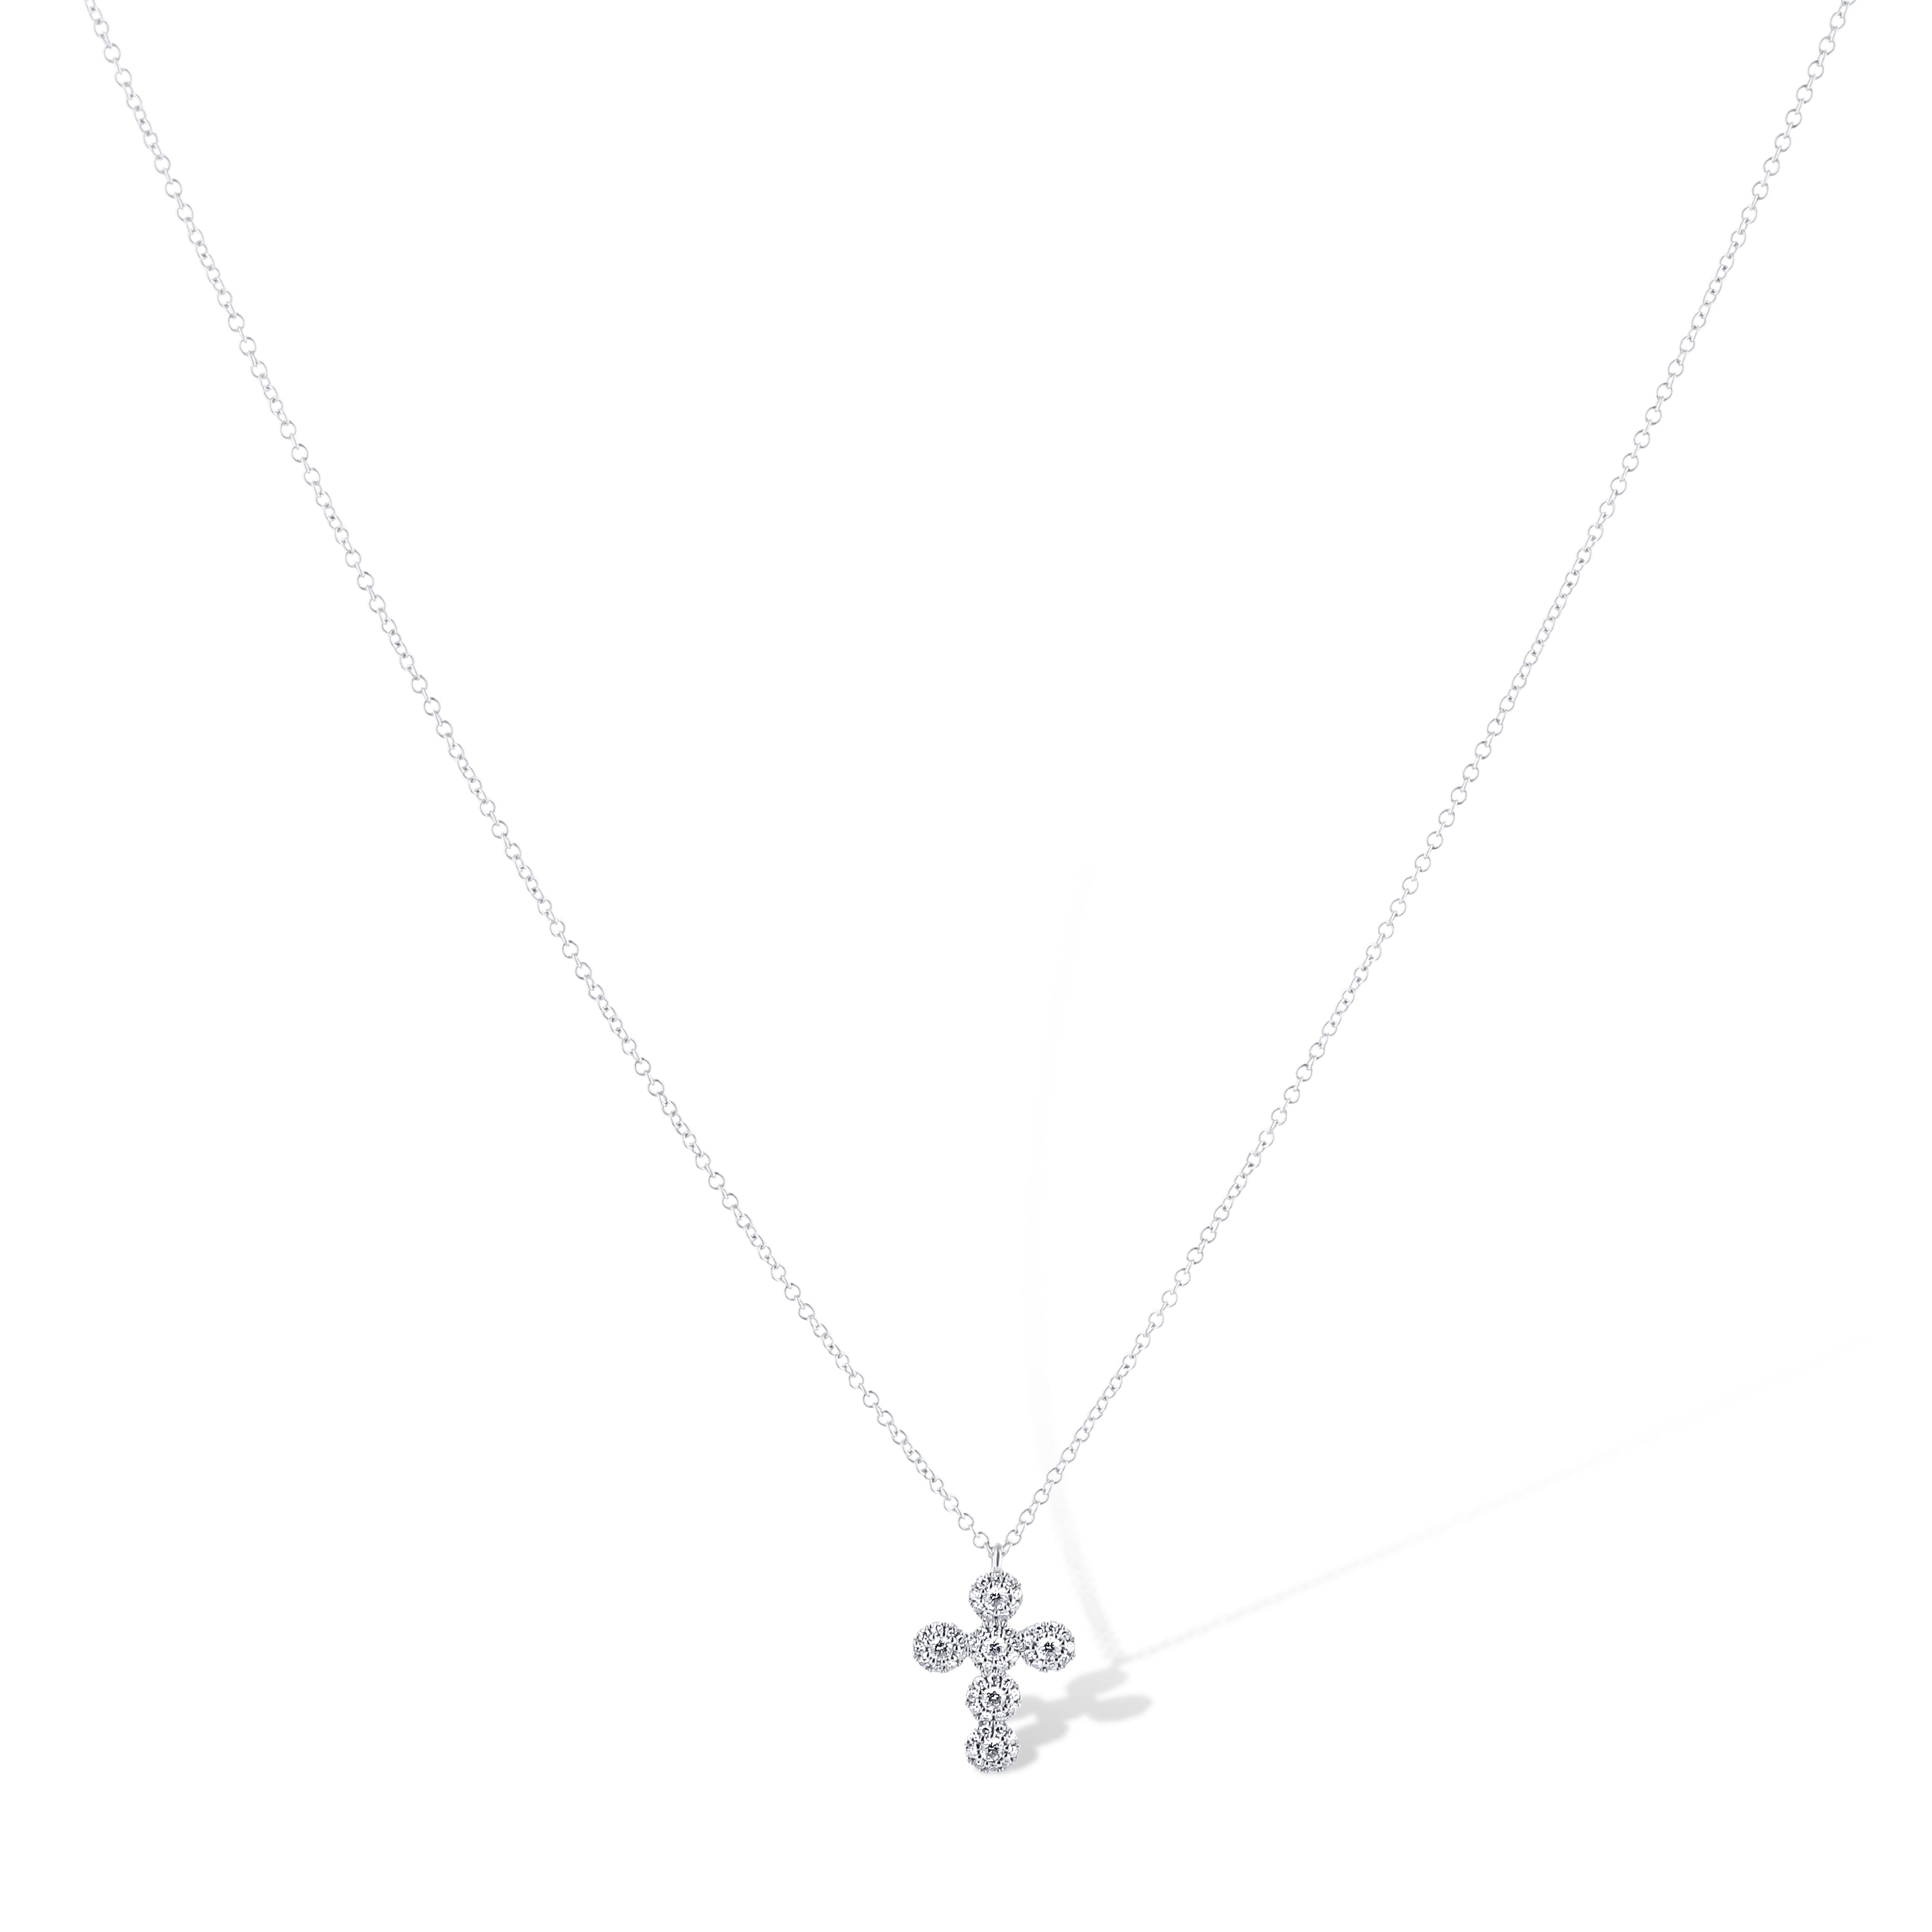 14K White Gold Cross Pendant Necklace With Diamond Halo And Chain